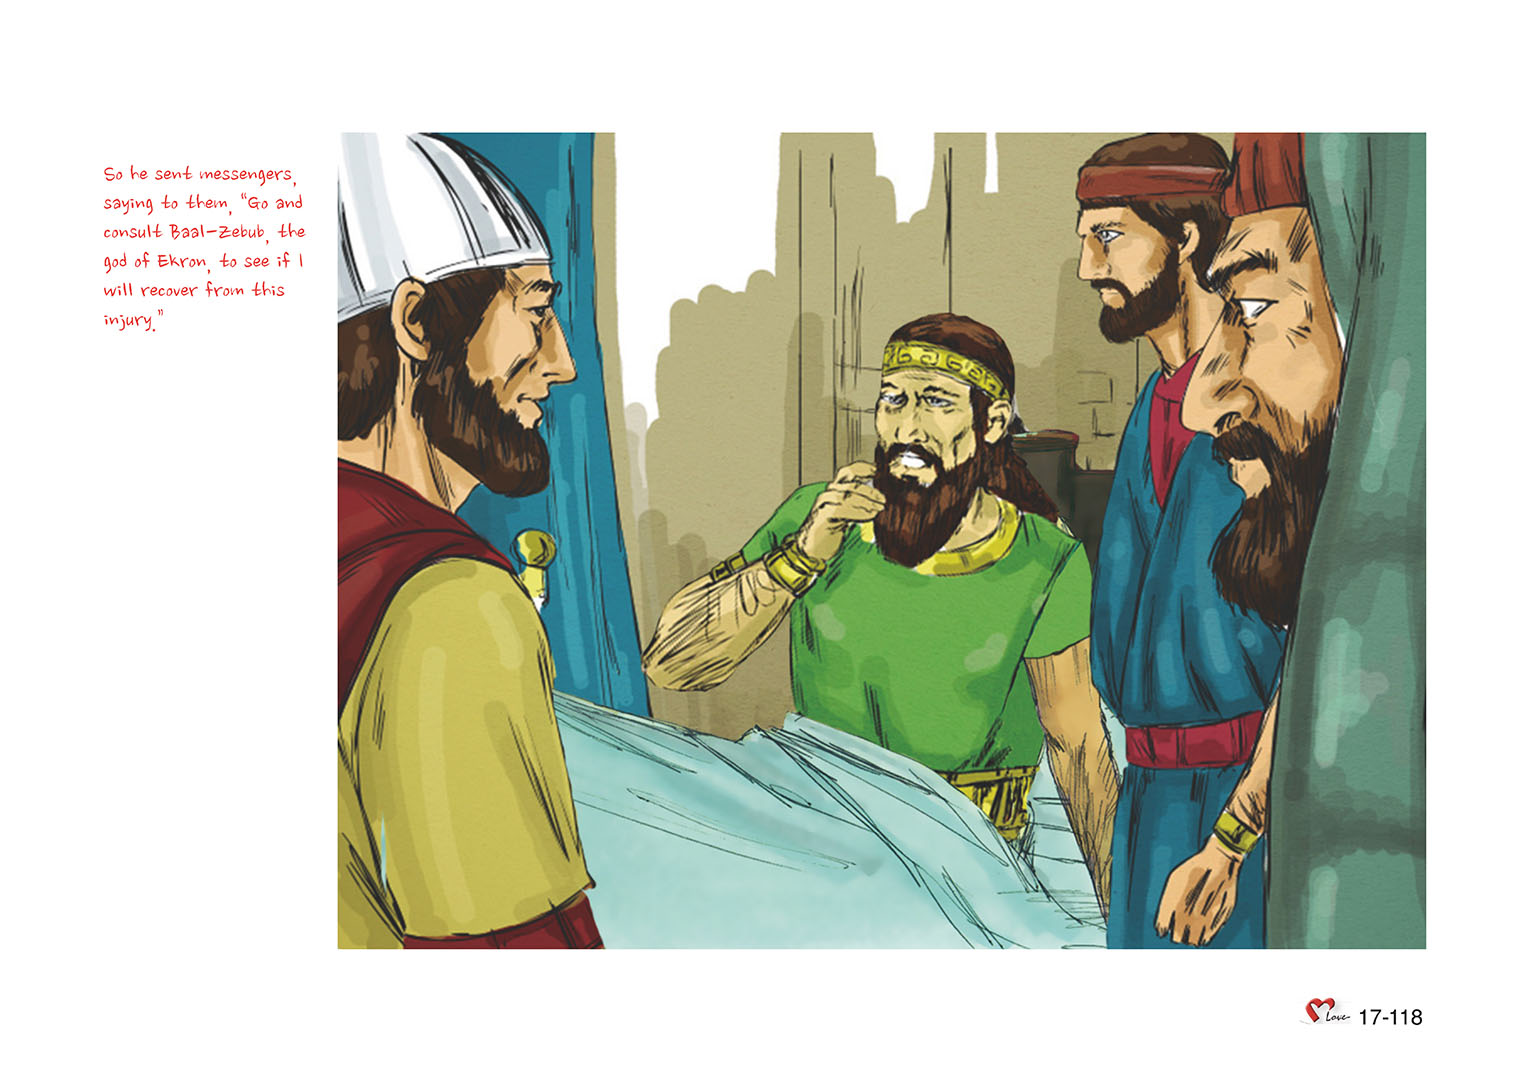 Chapter 17 - Lesson 55 - North king Ahaziah, Jehoram, and Jehu